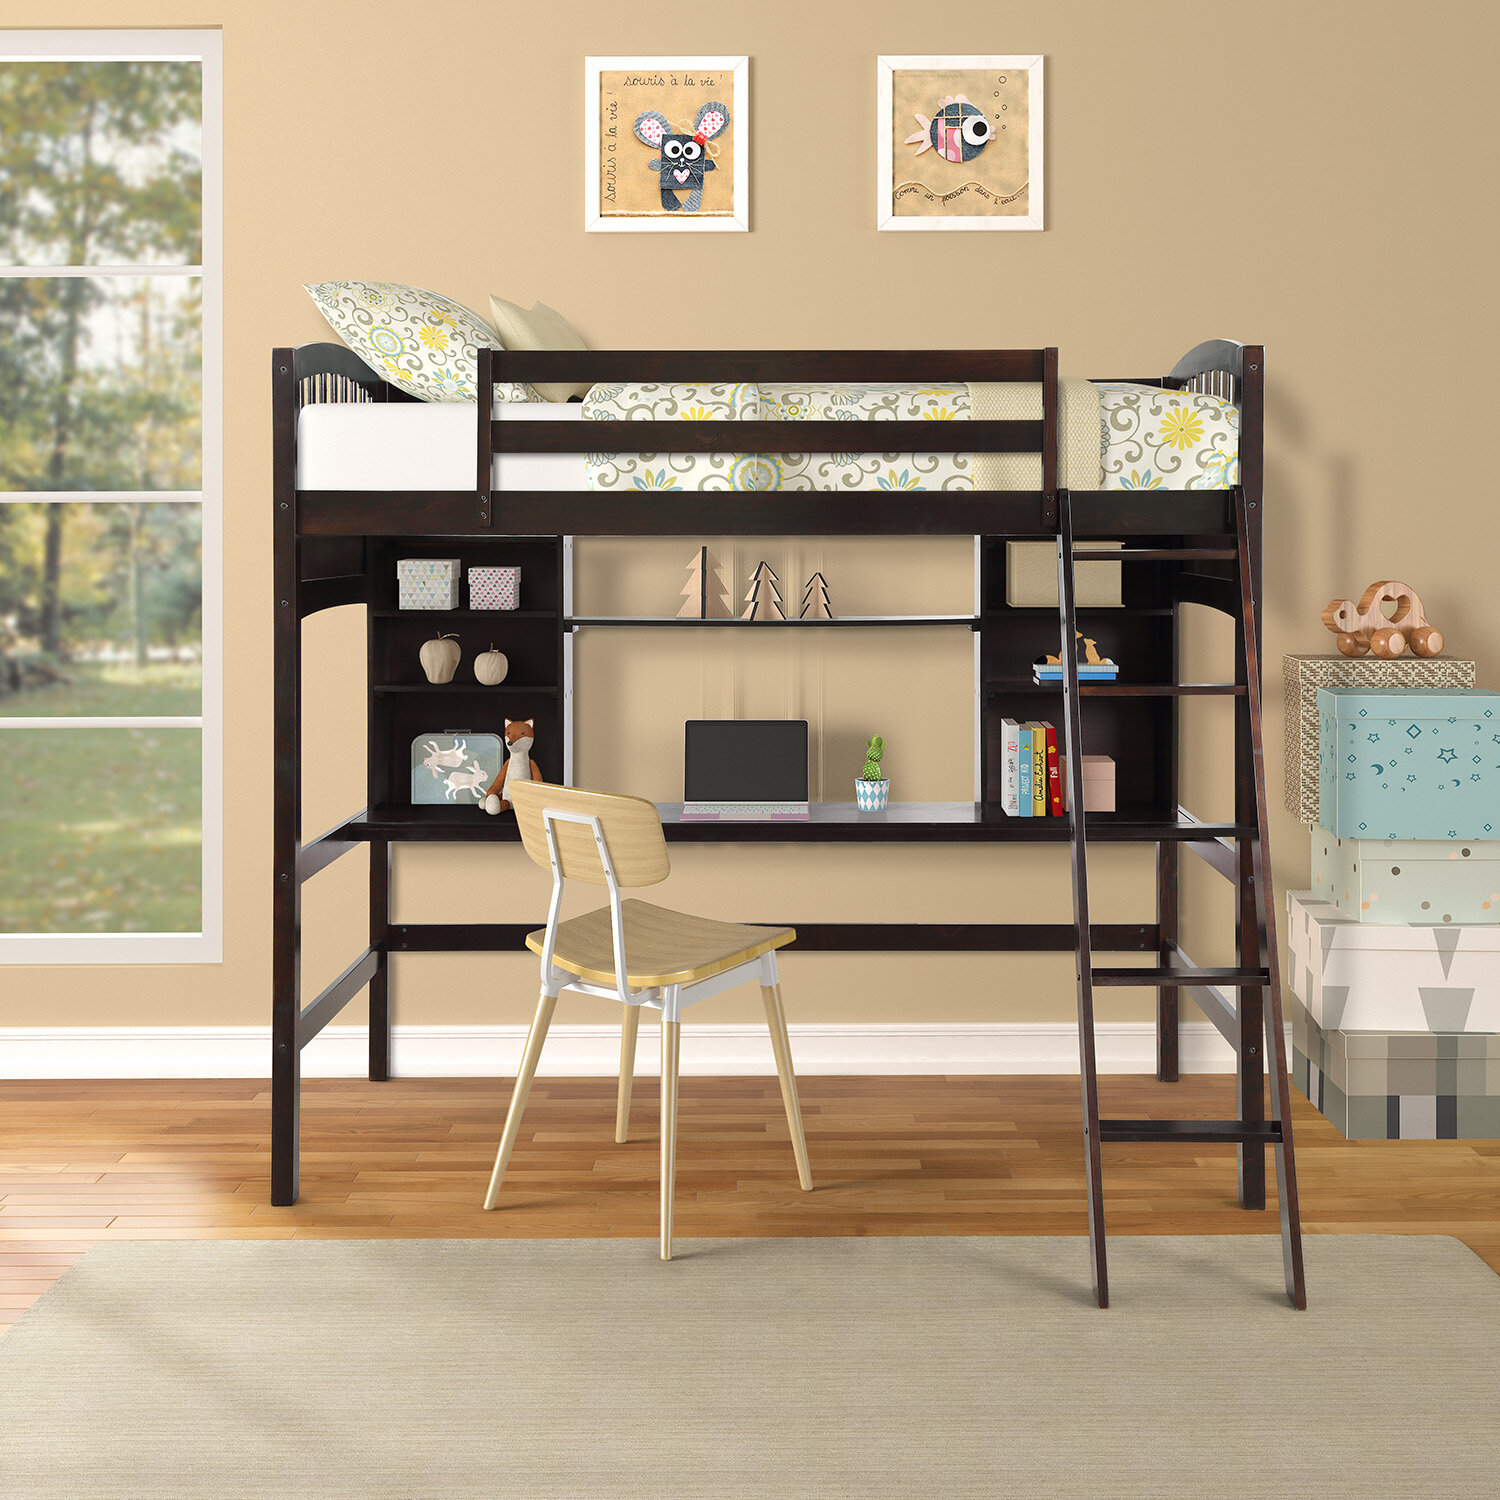 Harriet Bee Stoutland Twin Loft Bed With Desk And Shelves